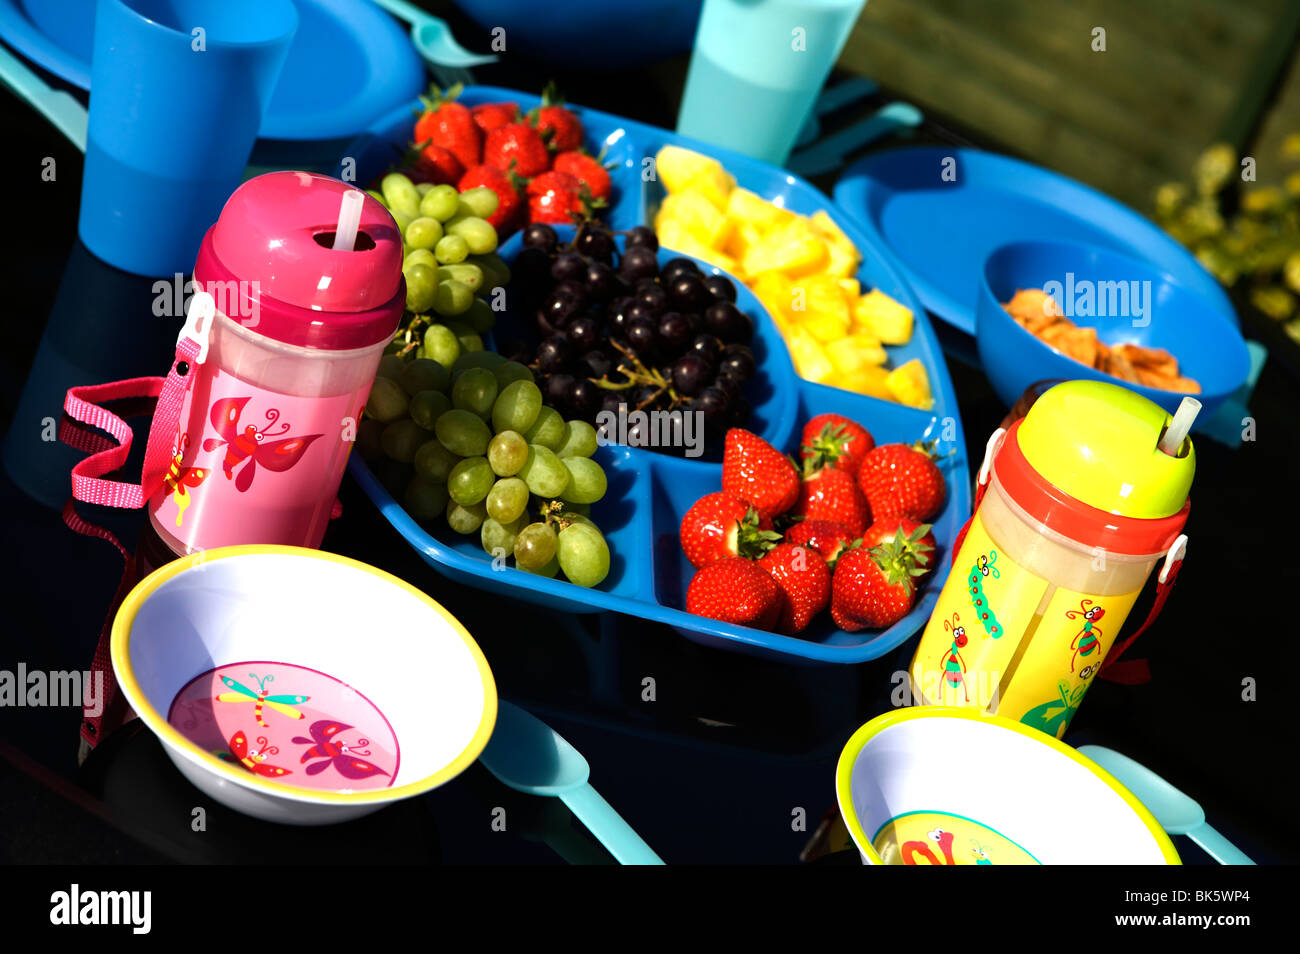 Outdoor meal or picnic on a black table with blue plastic bowls, cups, and jugs with fruit and salad Stock Photo